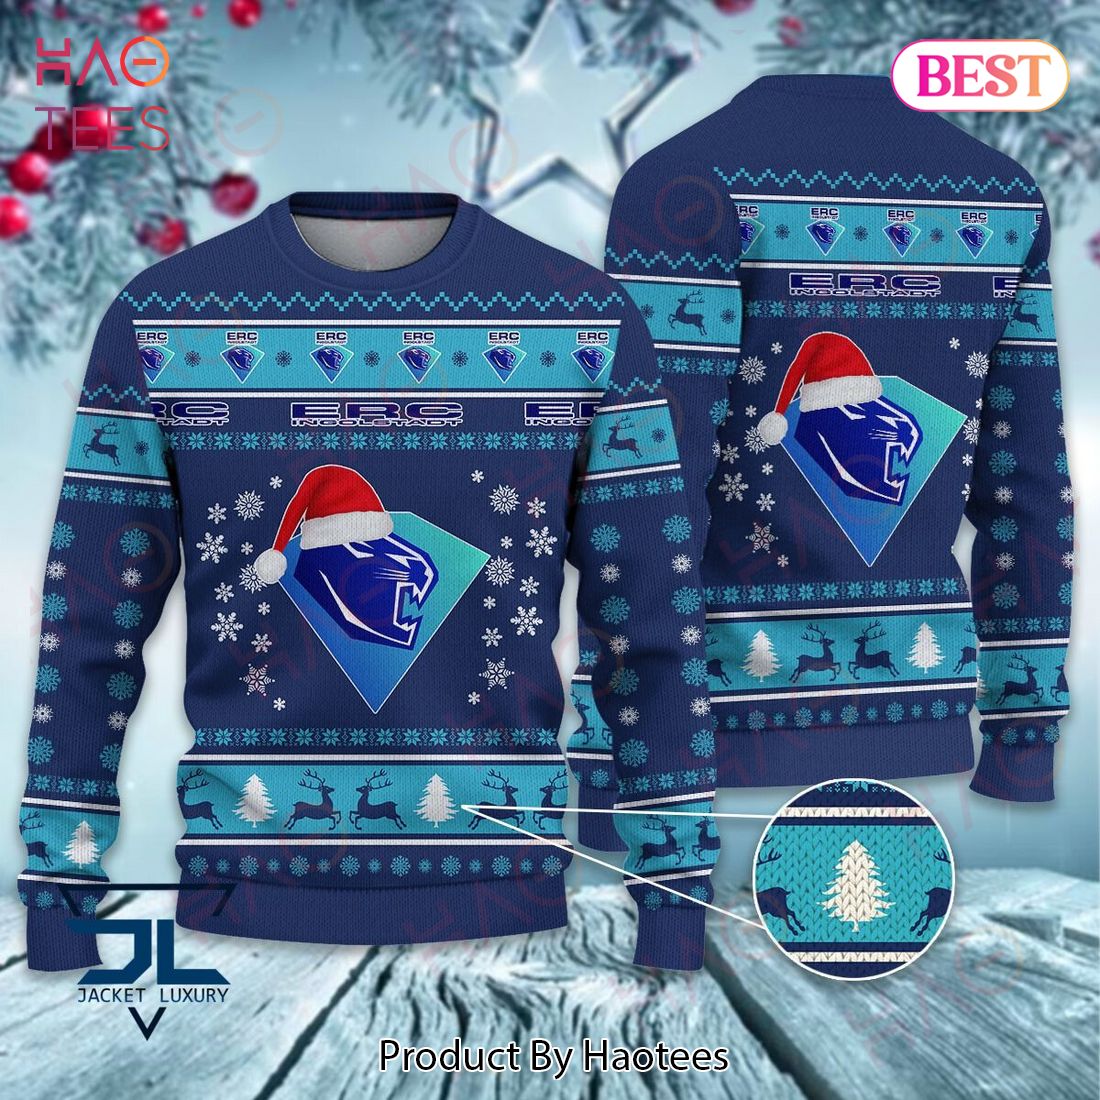 HOT ERC Ingolstadt Blue Color Christmas Luxury Brand Sweater Limited Edition